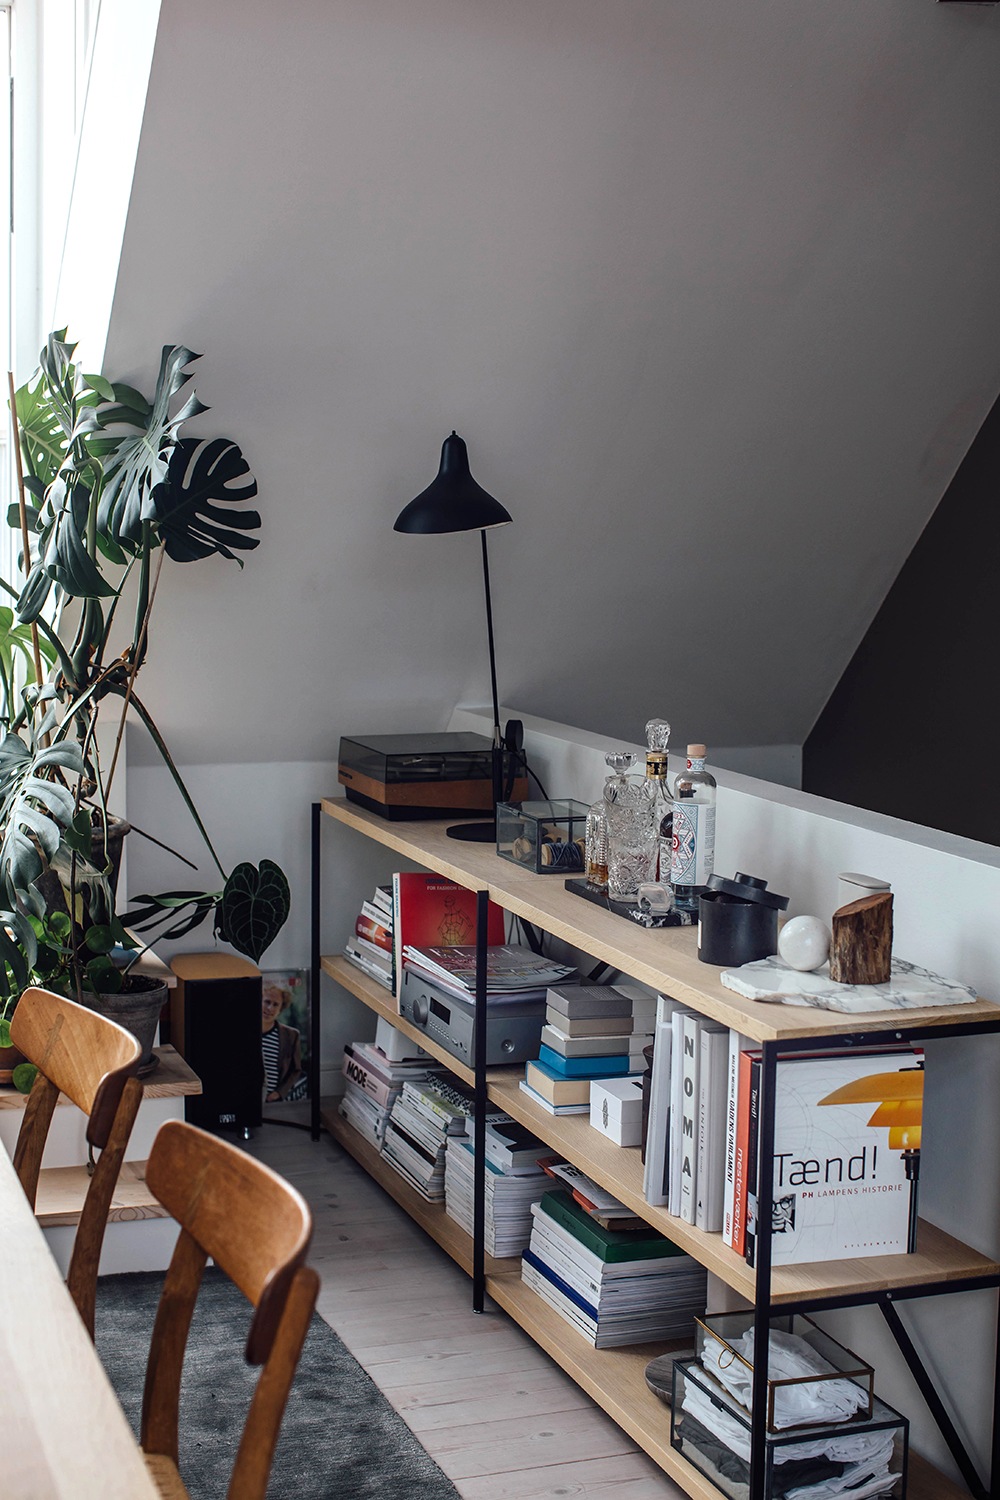 Home Tour with Line Borella in Copenhagen - Our Food Stories